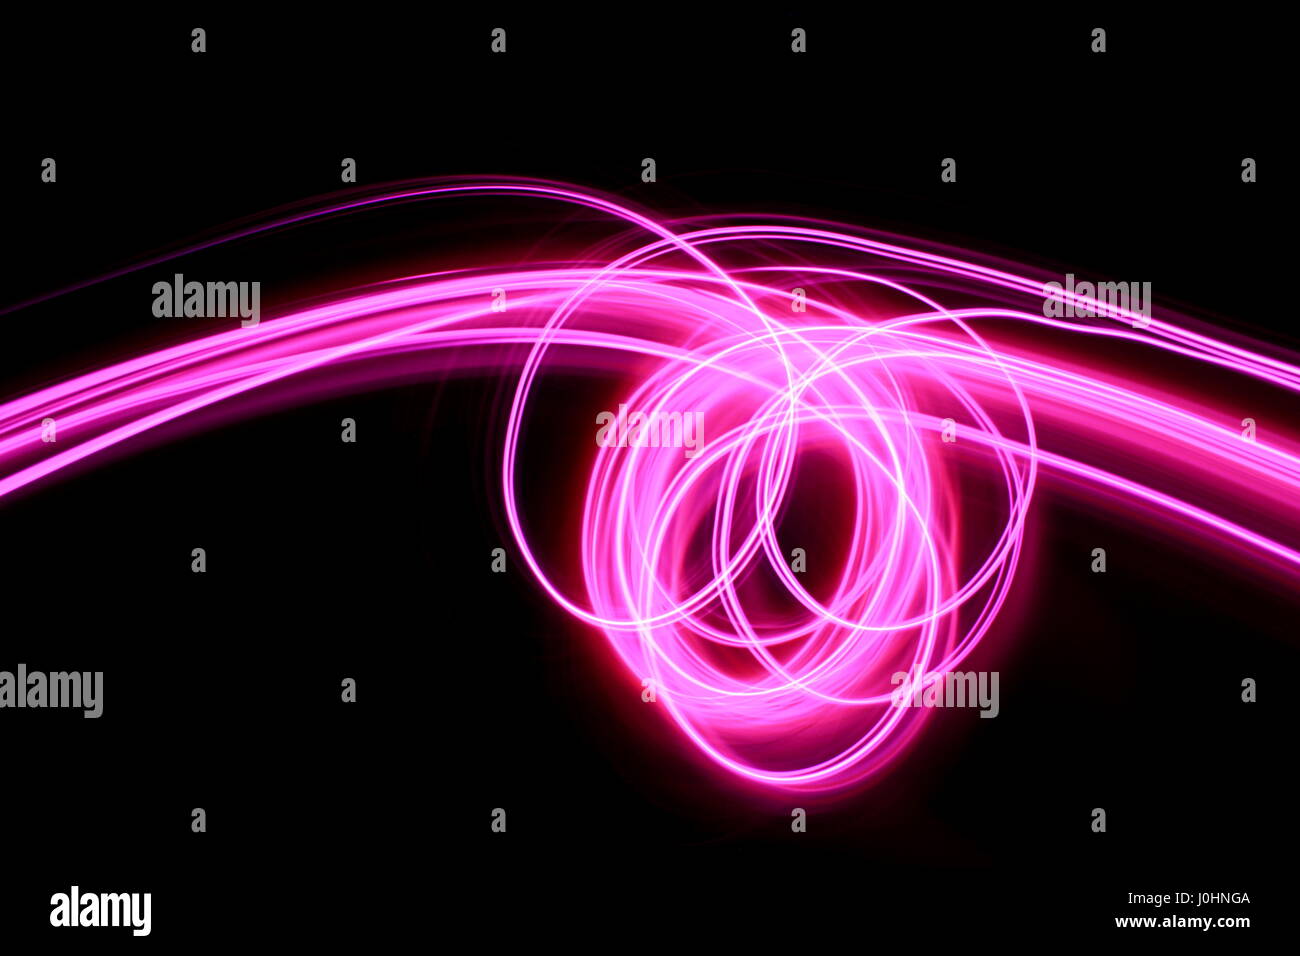 Pink light painting photography - long exposure photo of vibrant pink loops and swirls on black background.  Abstract light pattern. Stock Photo